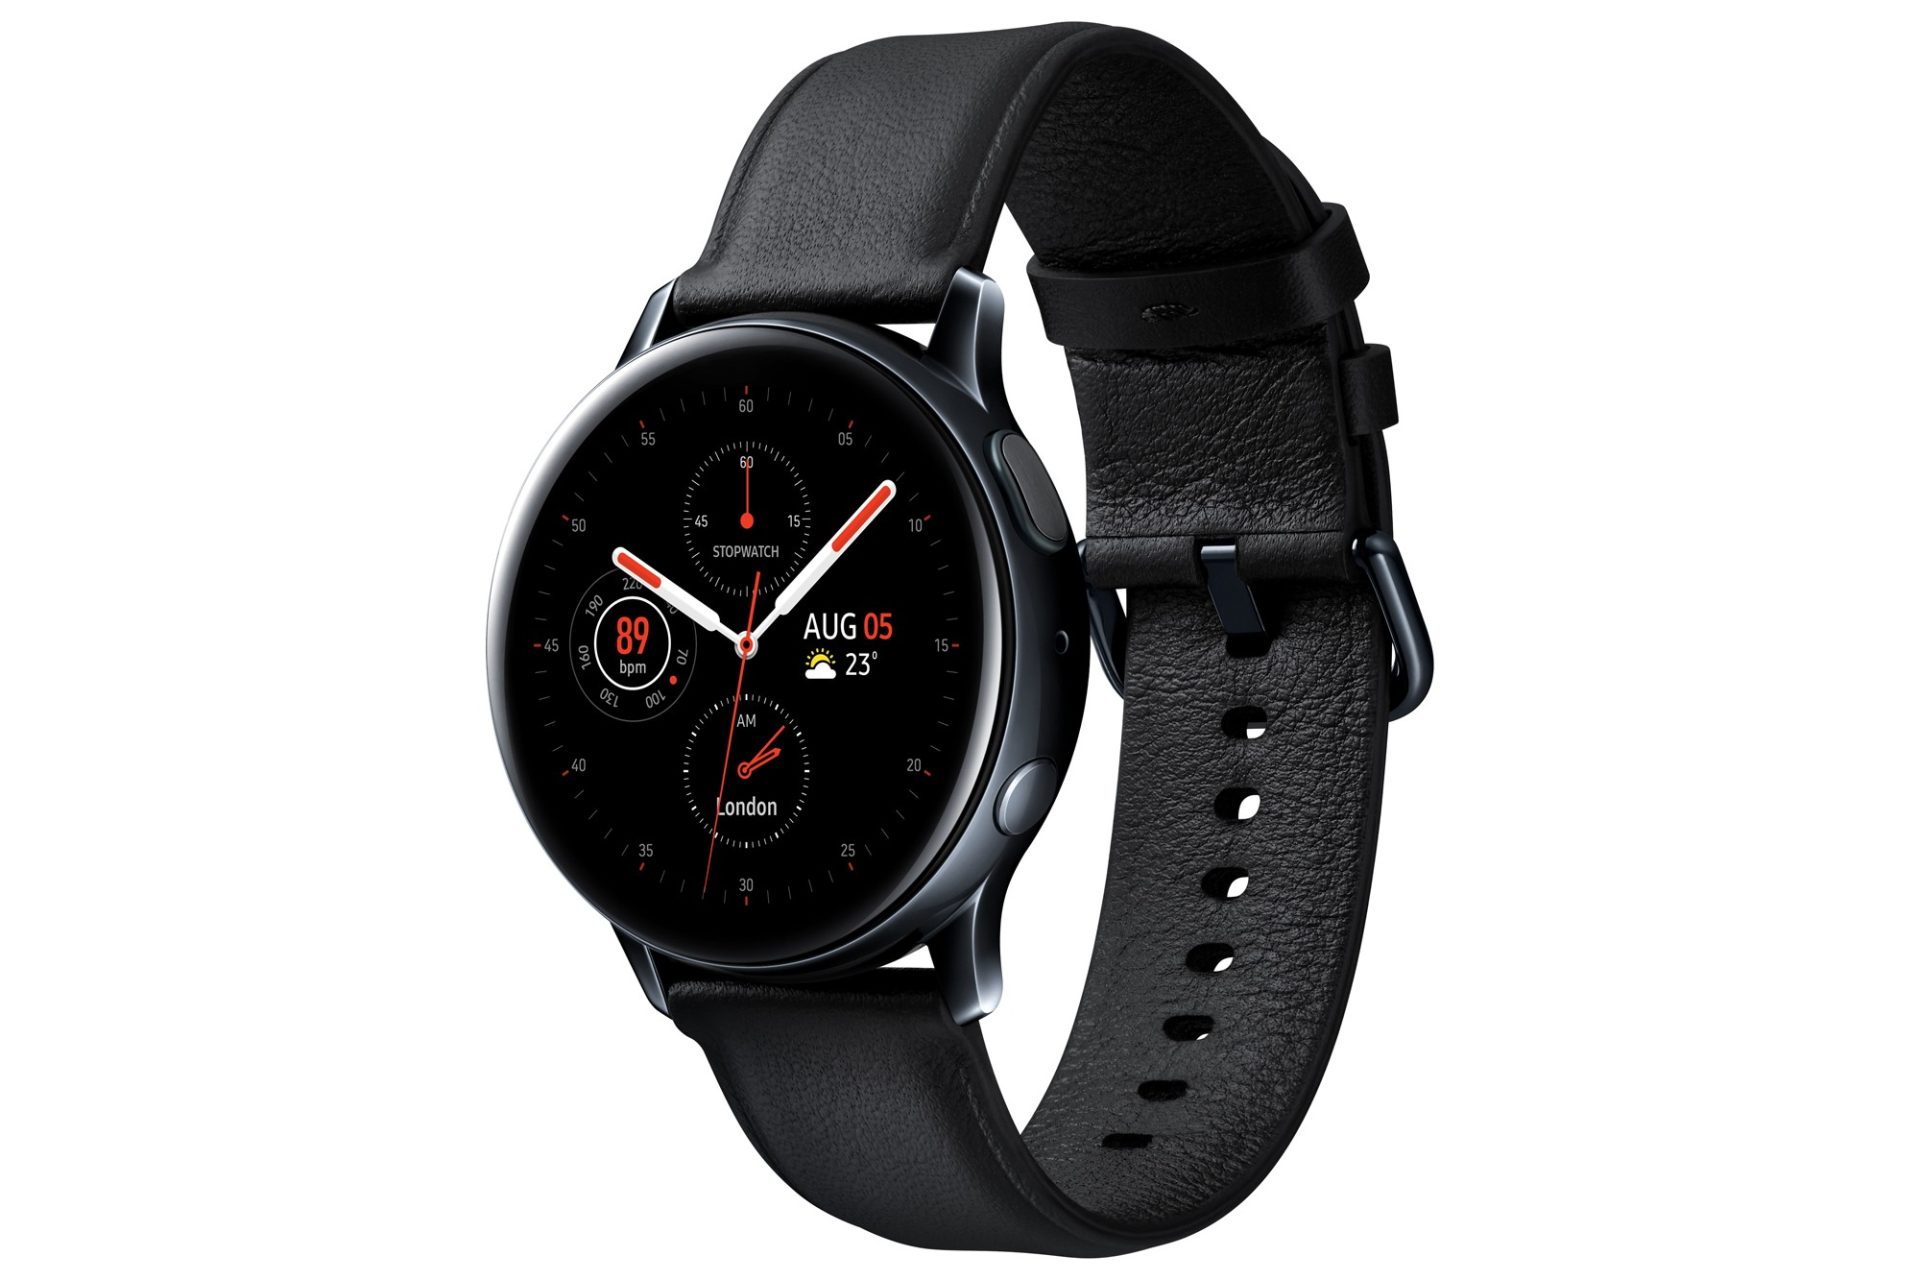 Samsung Galaxy Watch Active 2 Available to Pre-Order in UK - IoT Gadgets